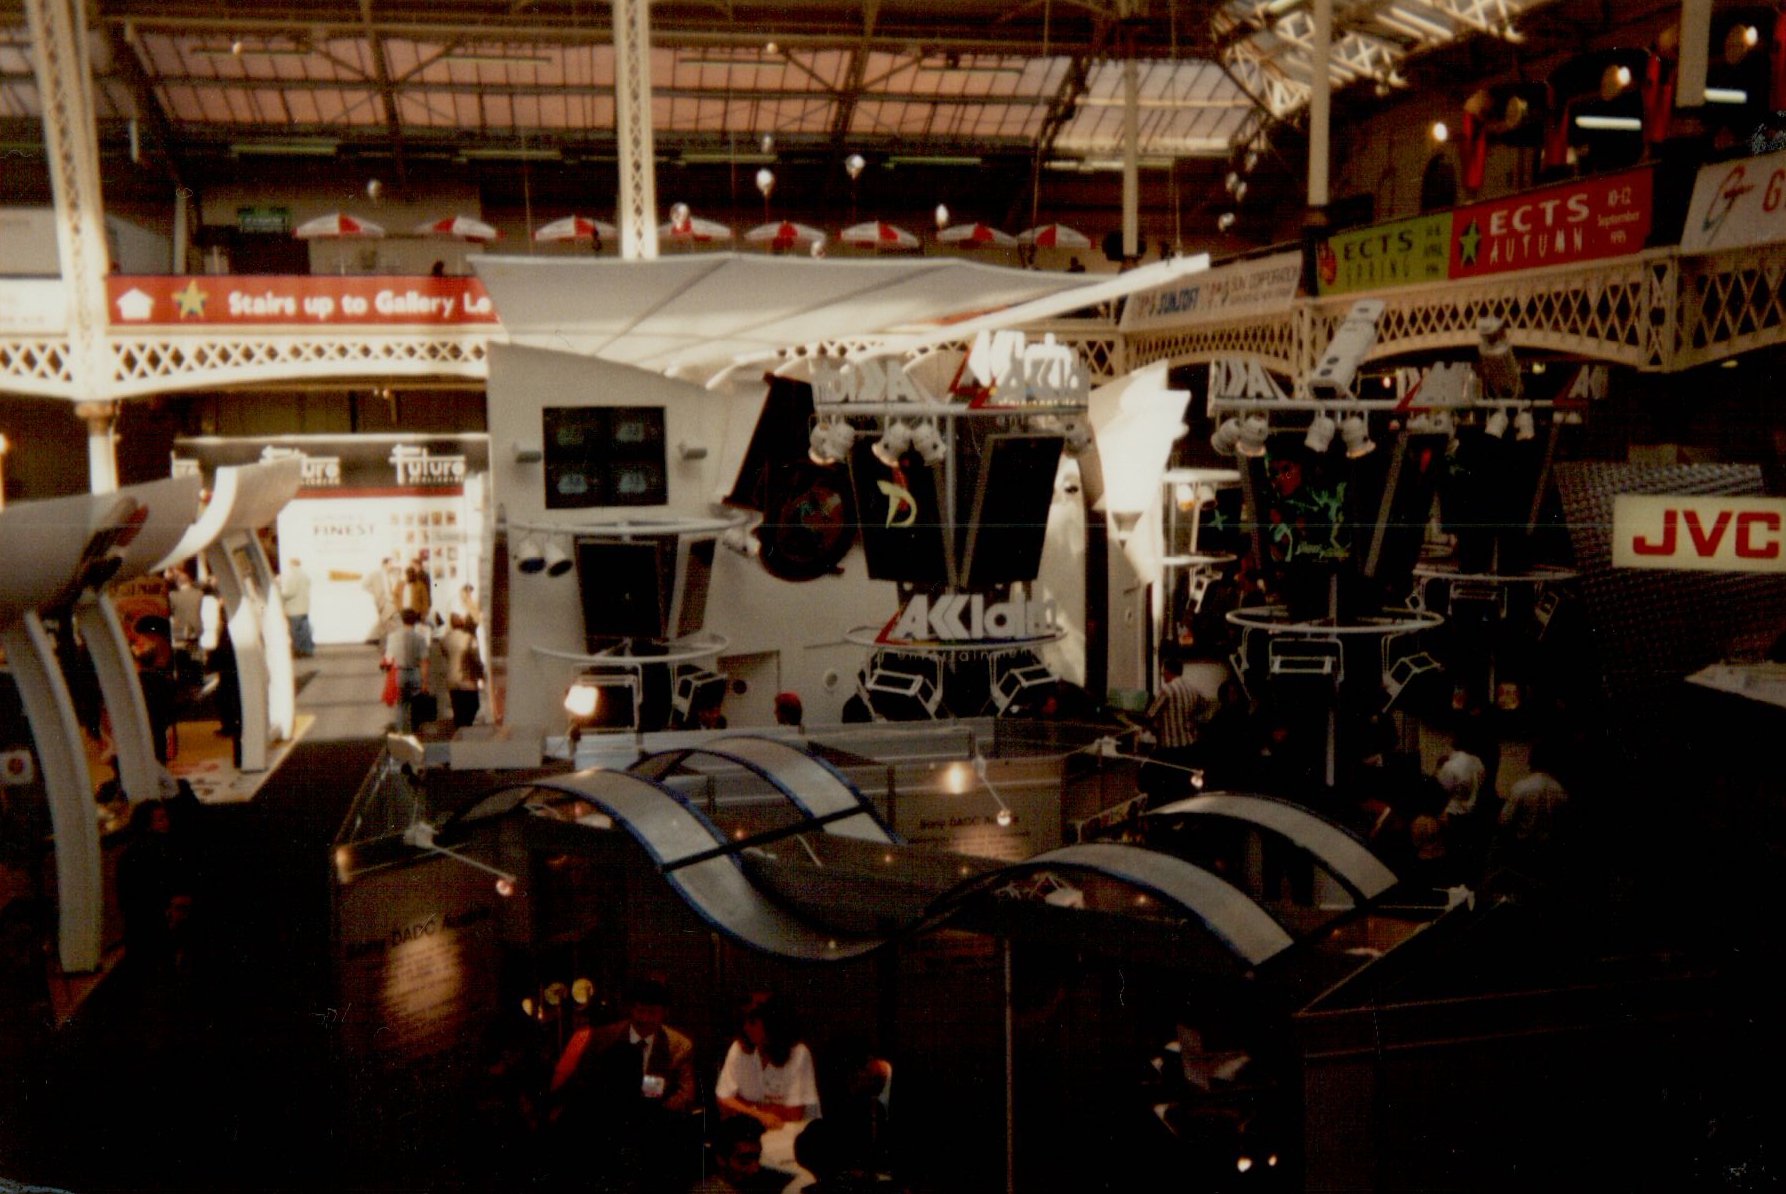 Acclaim ECTS 1995 gaming expo